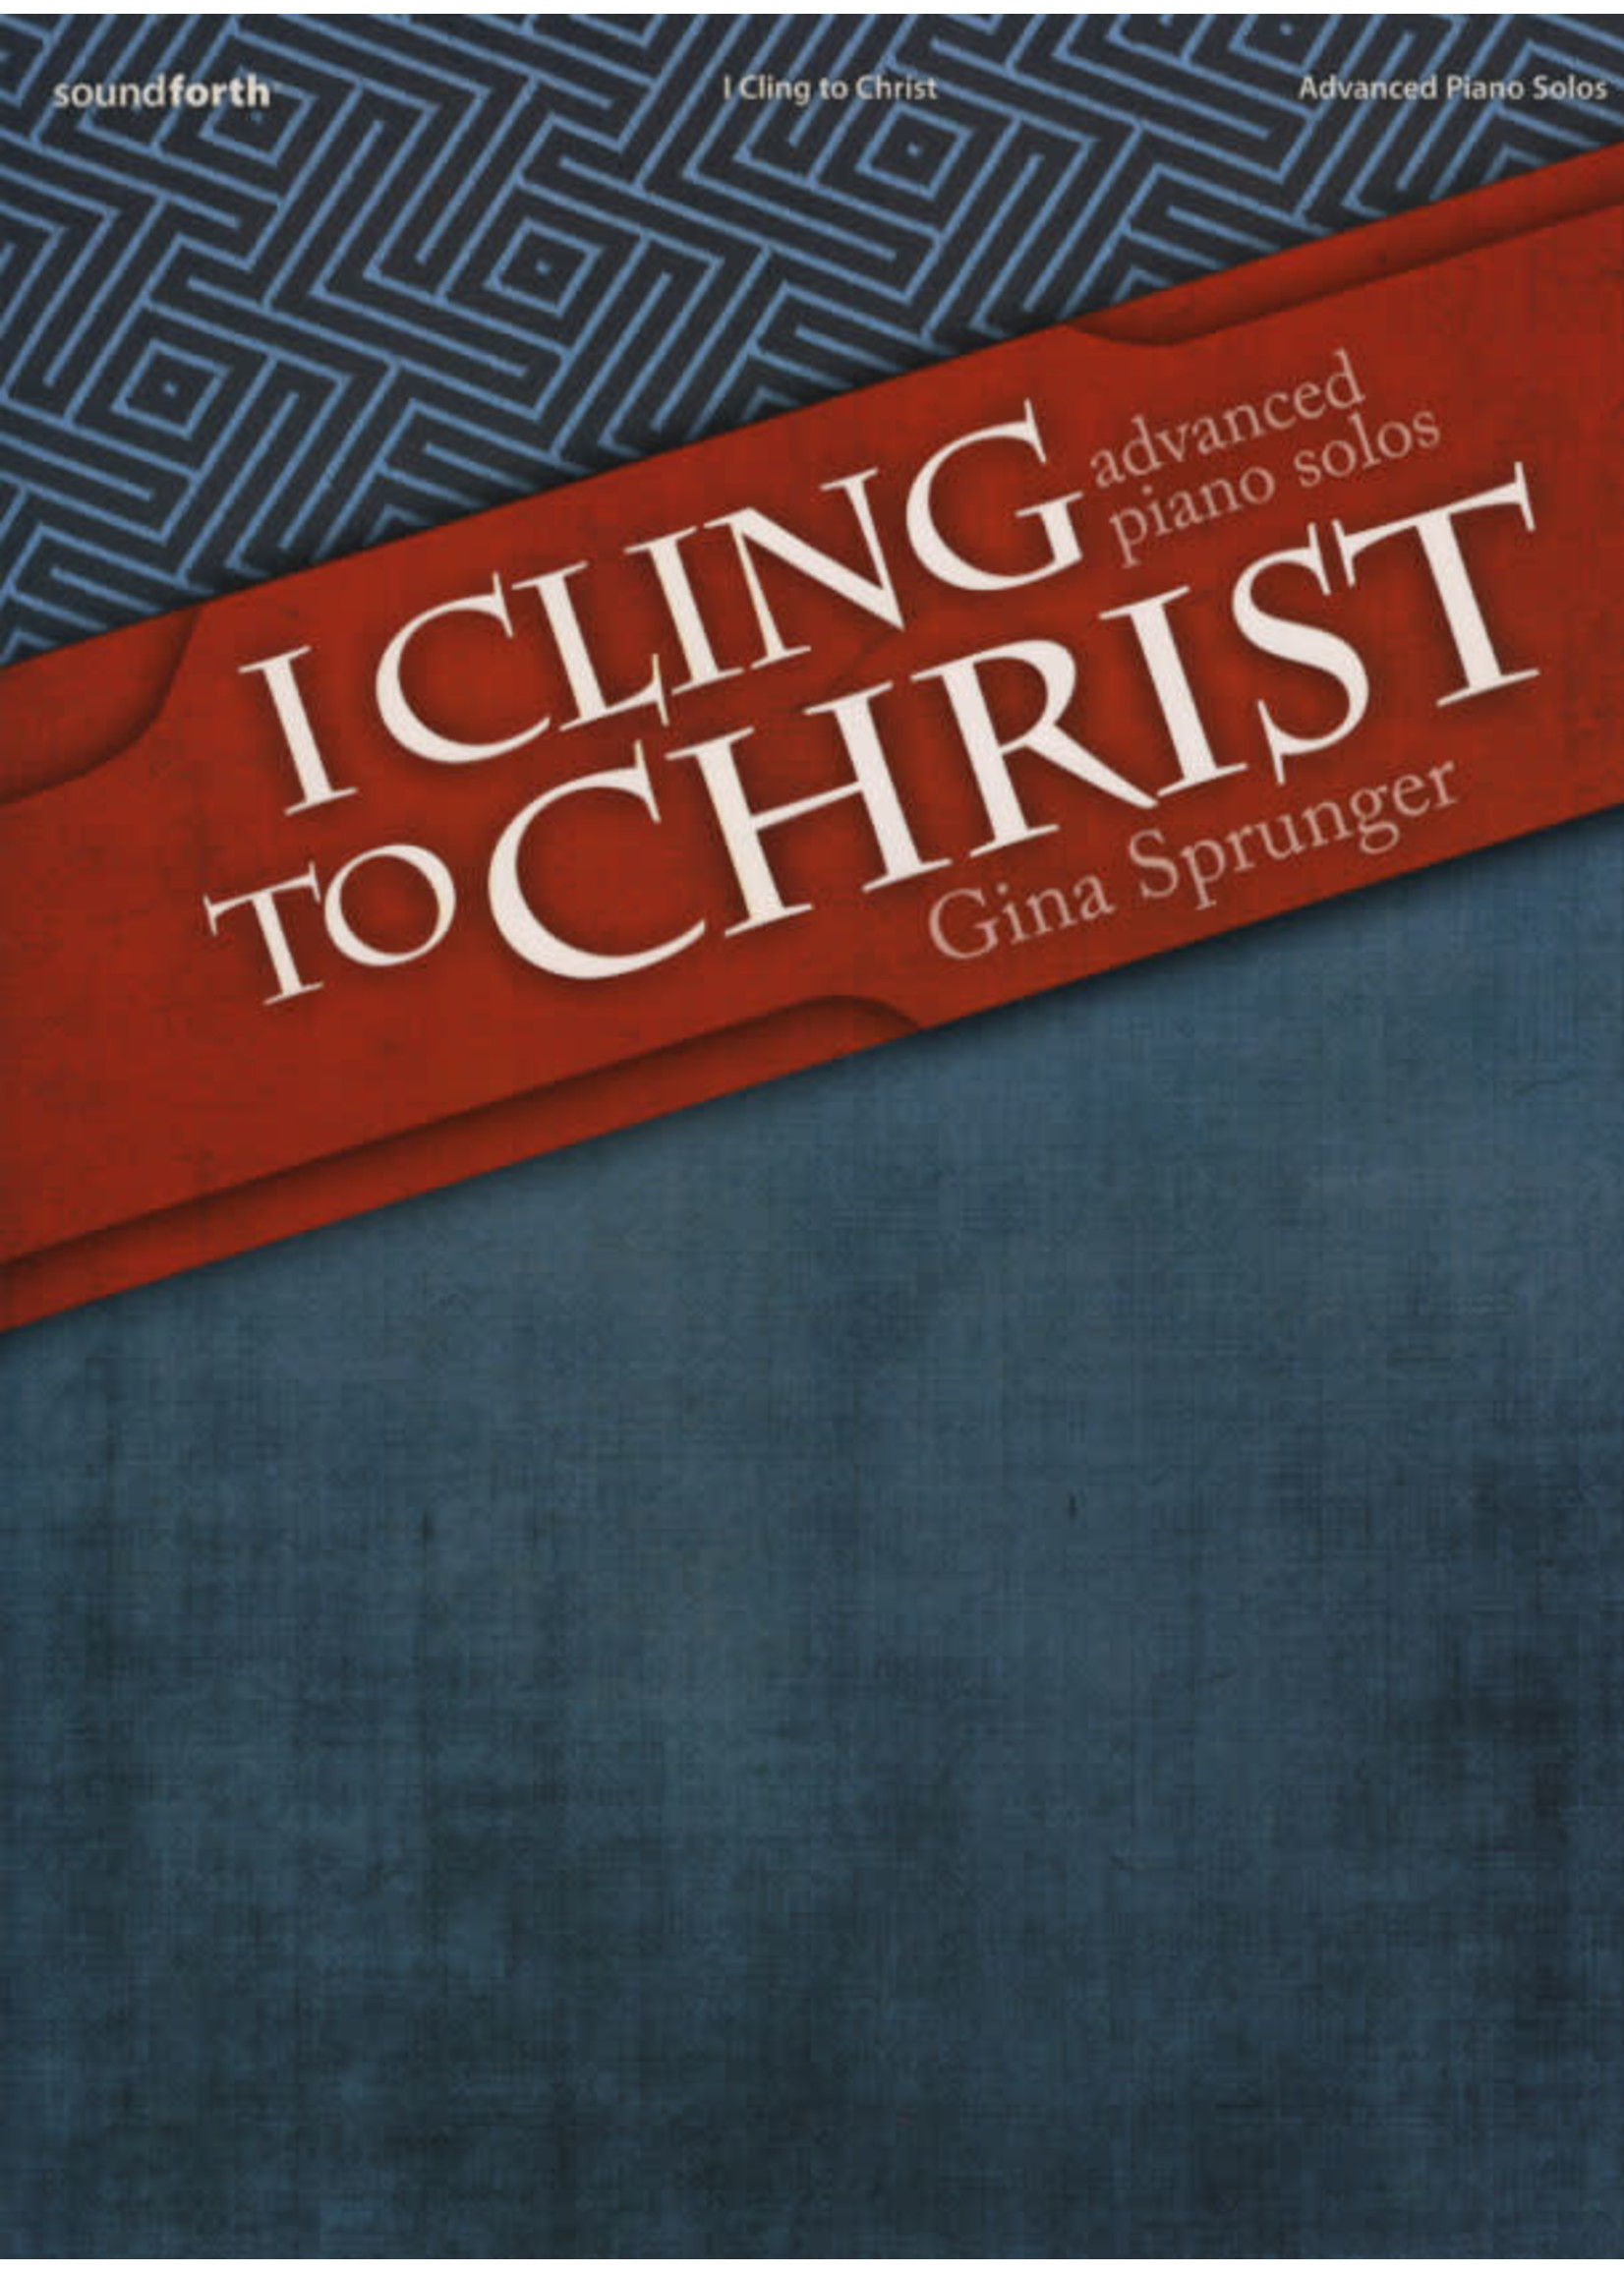 I Cling to Christ Piano Solos (Sprunger)